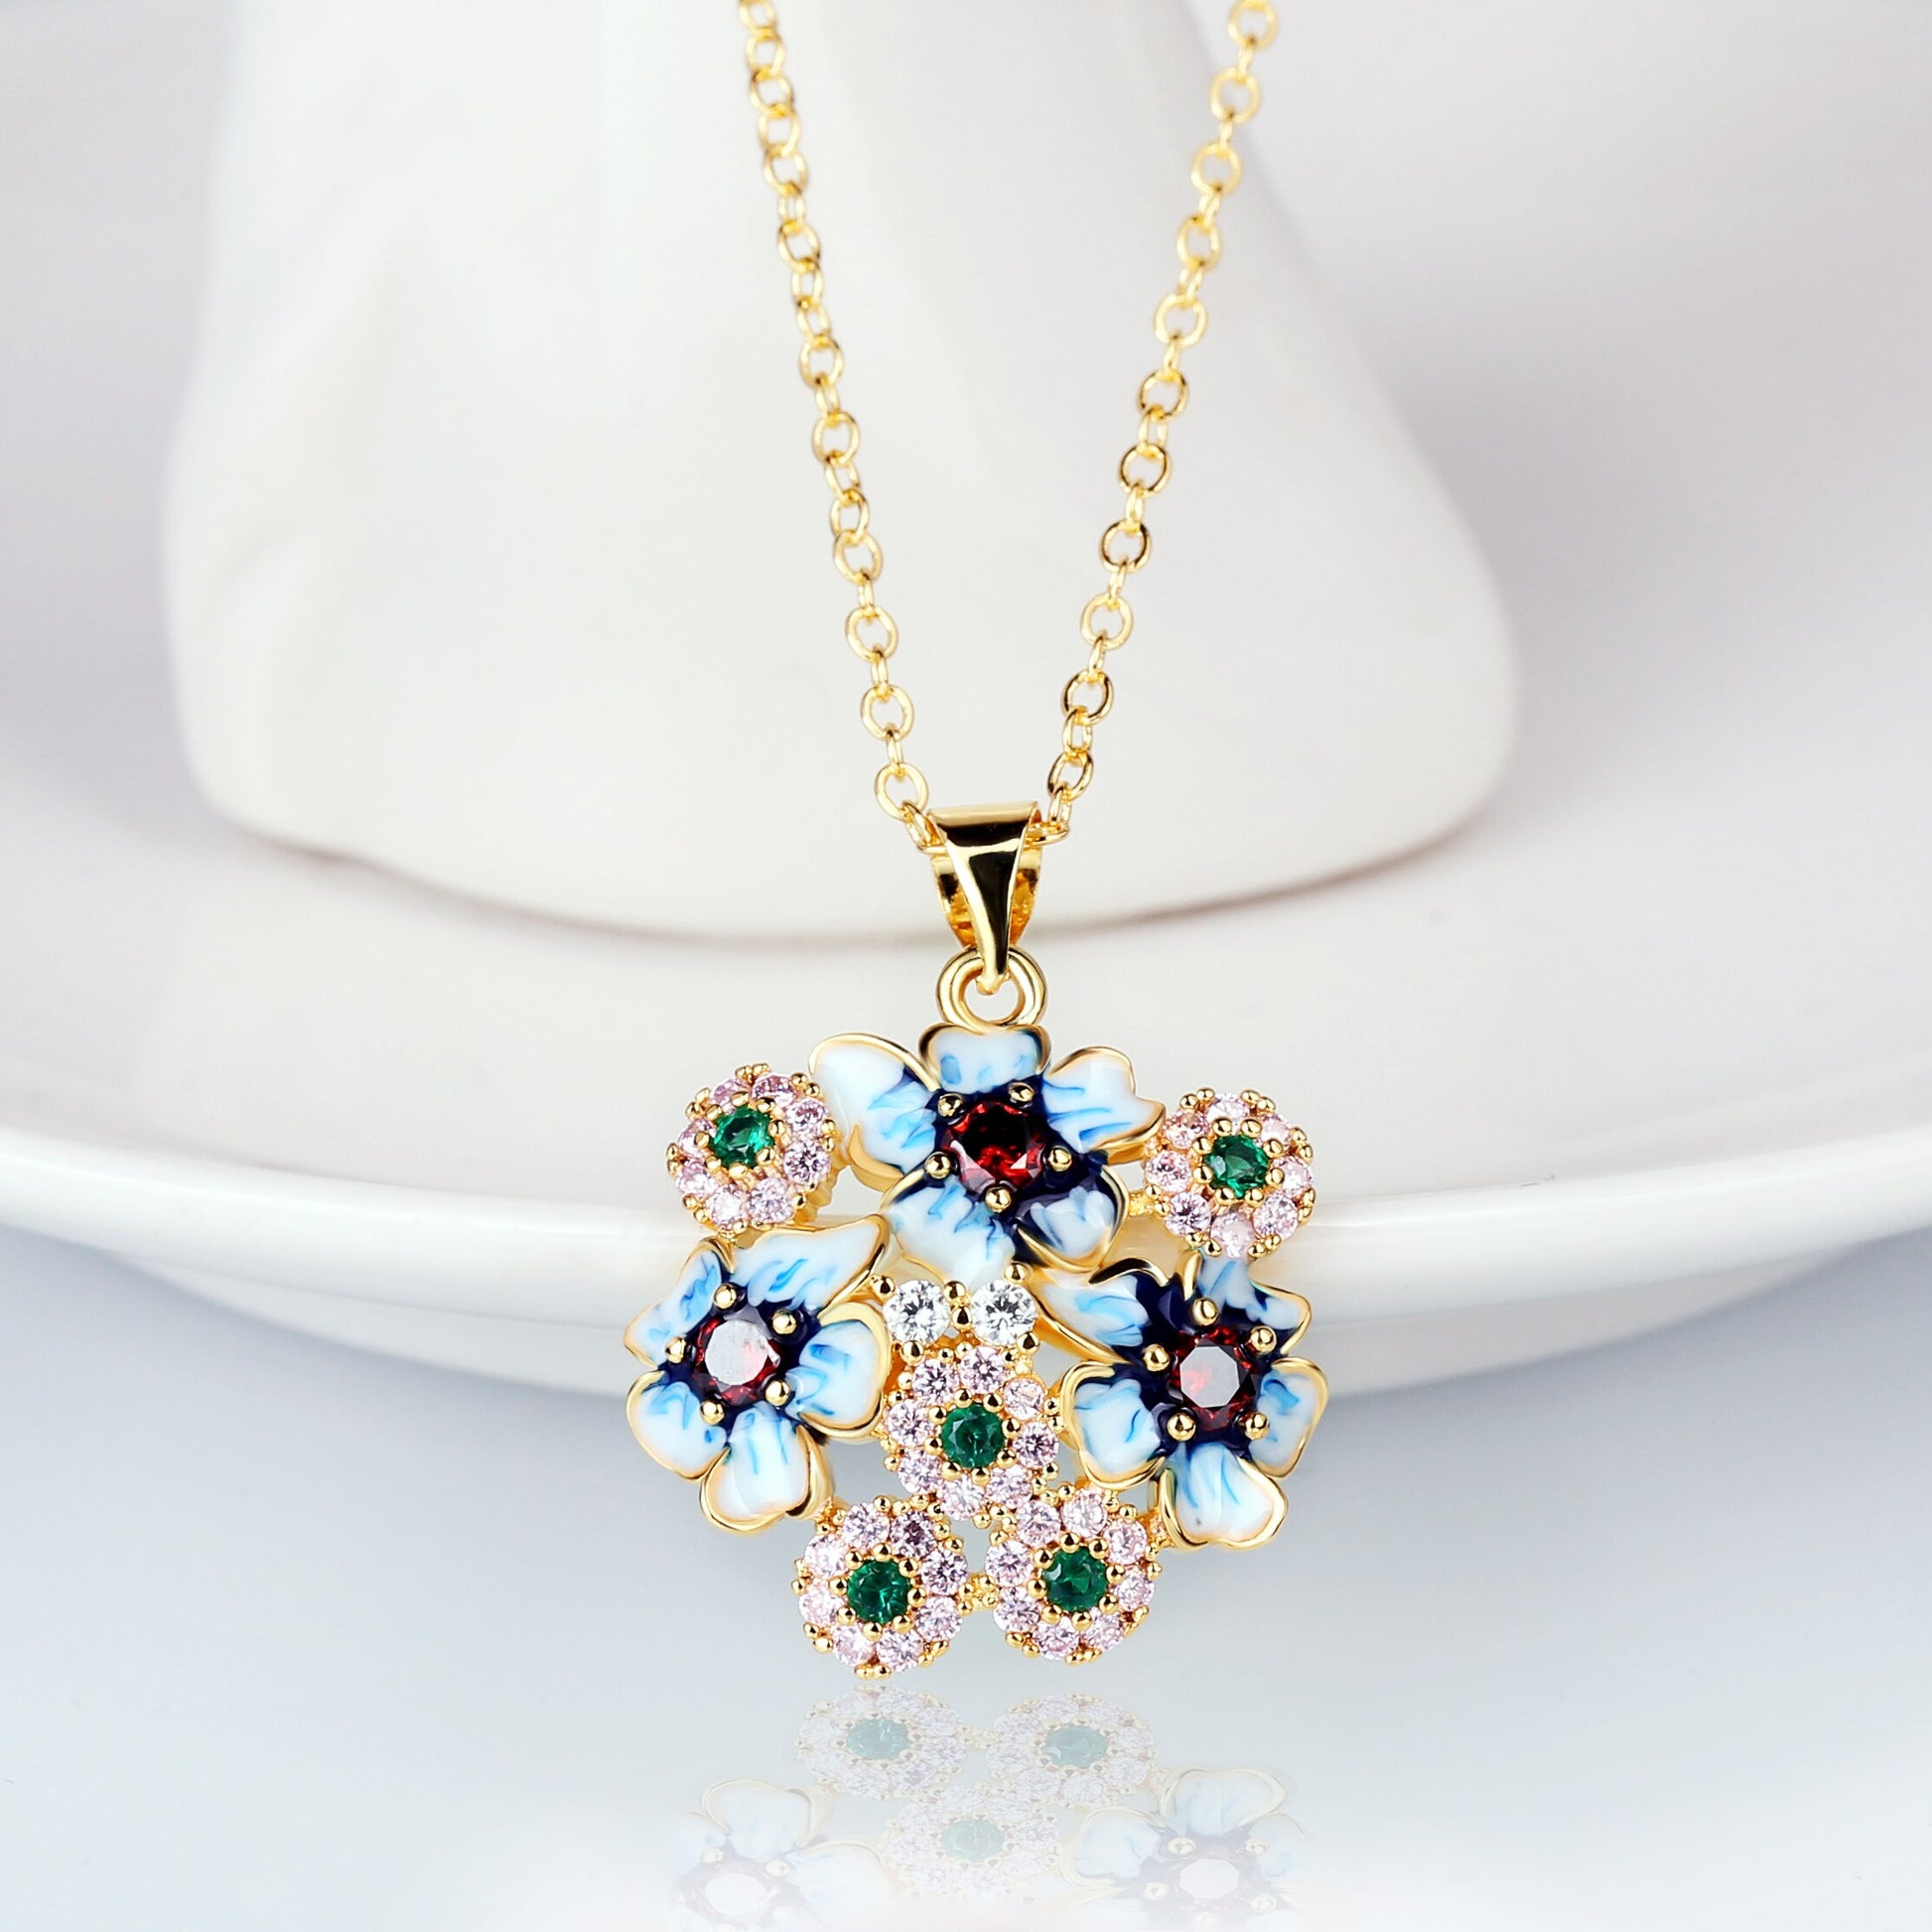 Exquisite Colorful Flower Enamel Pendant Necklaces in 925 Sterling Silver